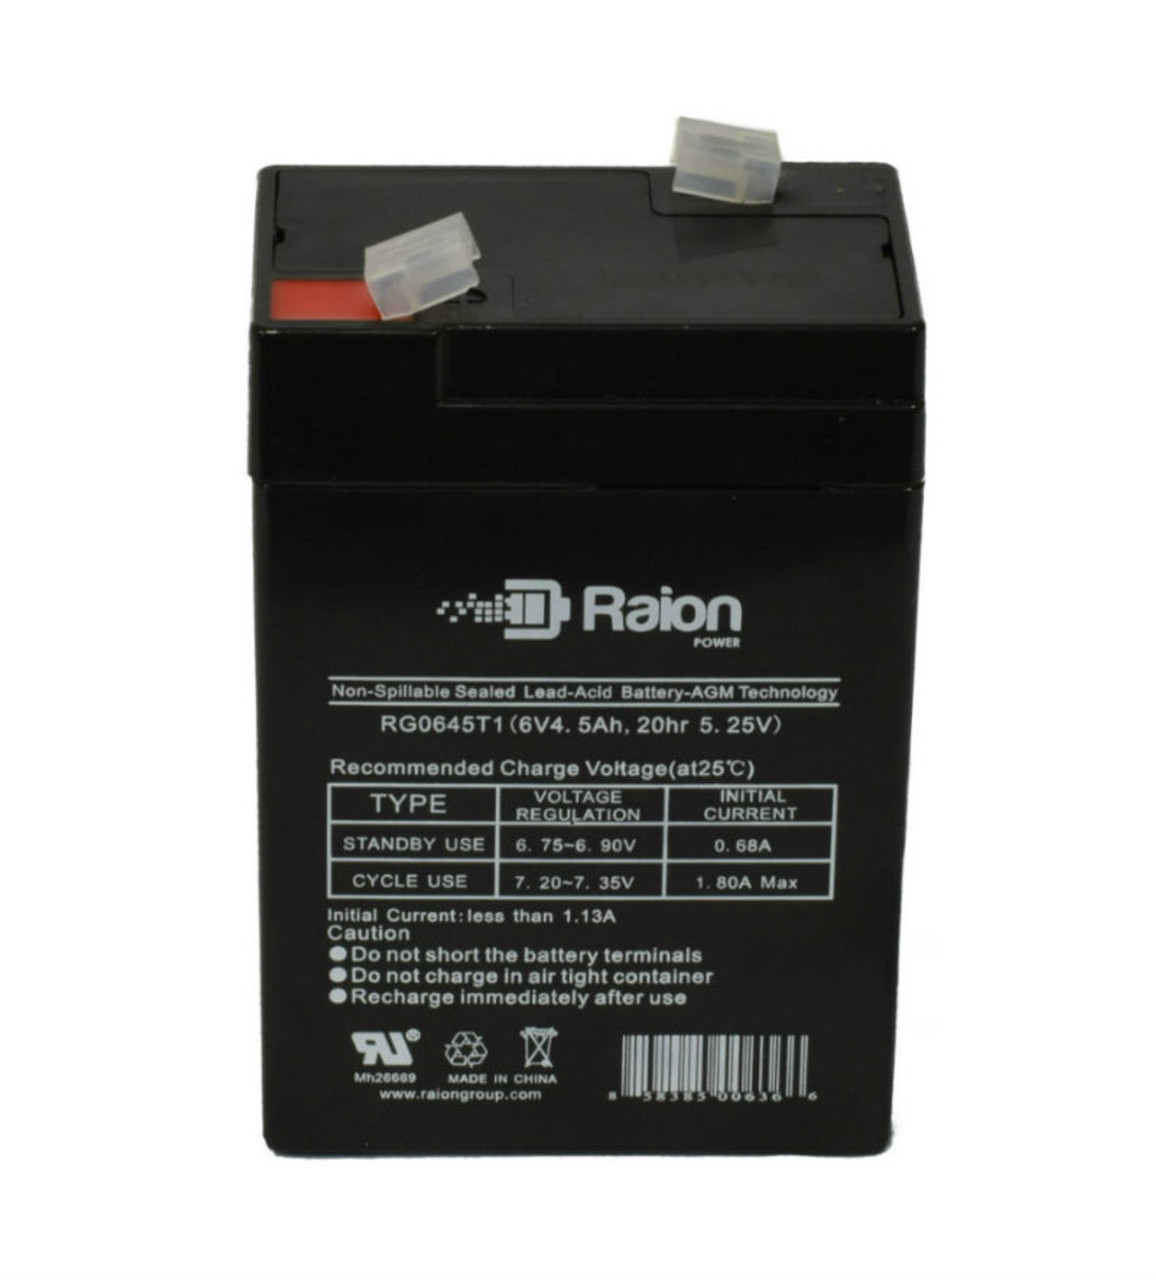 Raion Power RG0645T1 Replacement Battery Cartridge for Mule EP